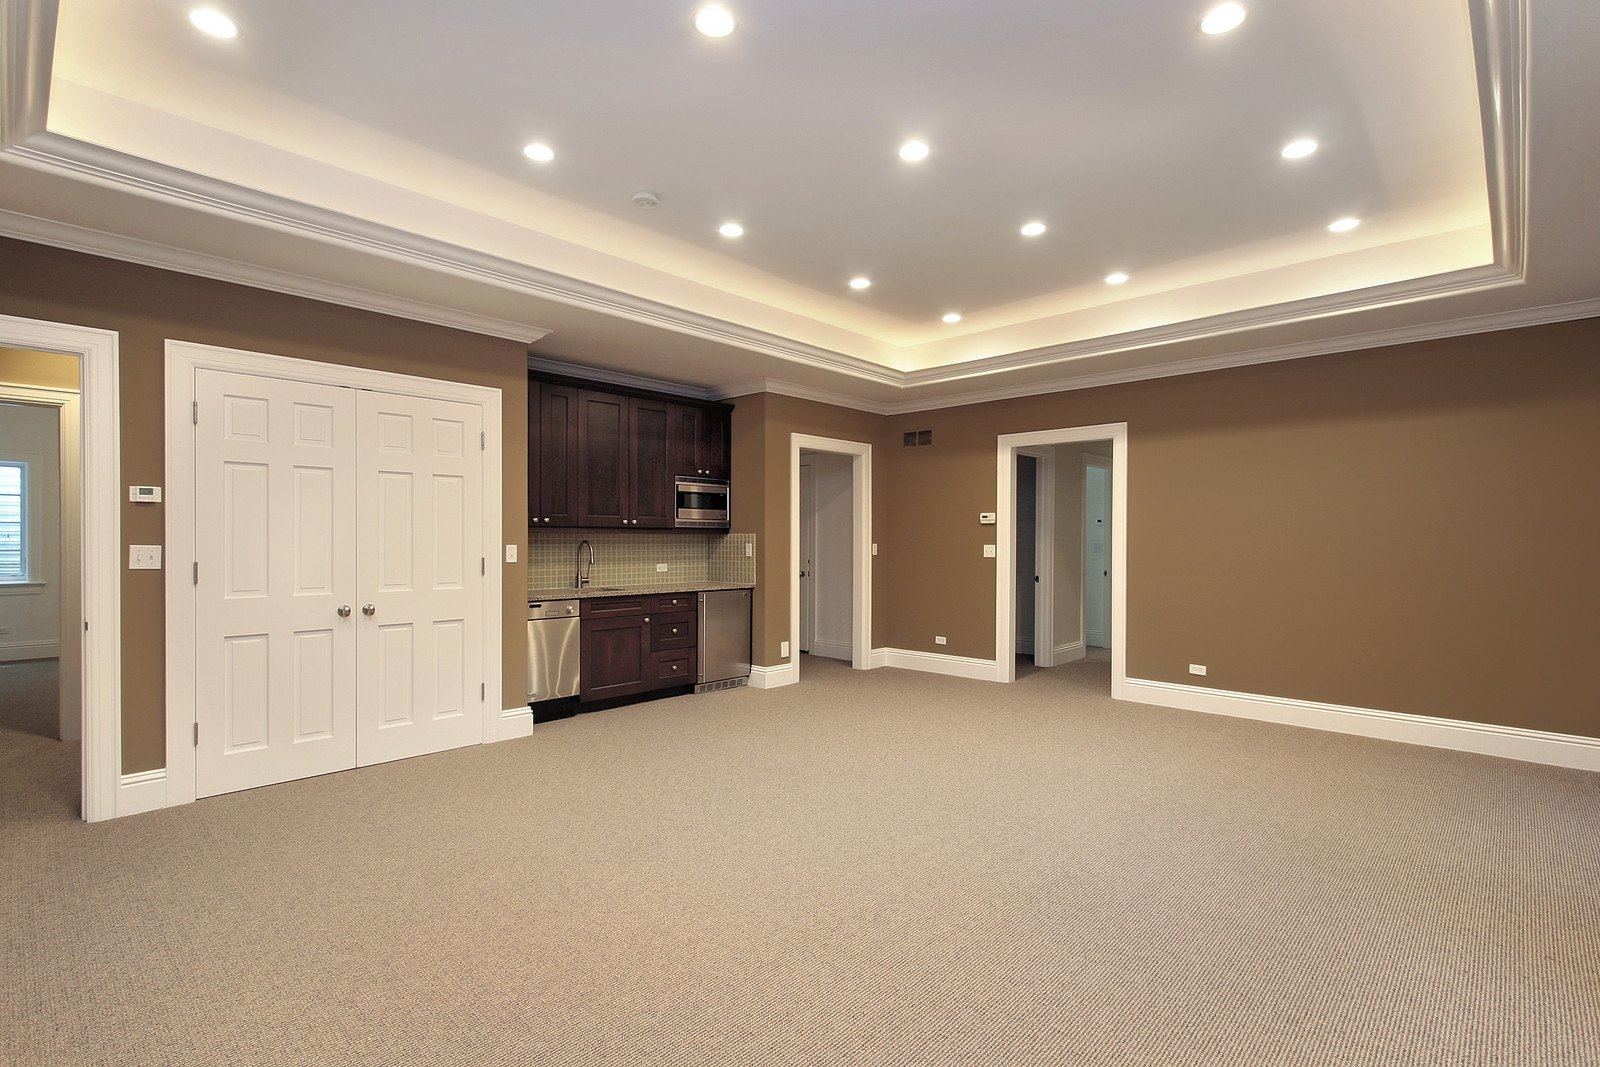 LED cove lighting allows you to add home theater lighting without creating  a glare or shining onto your screen